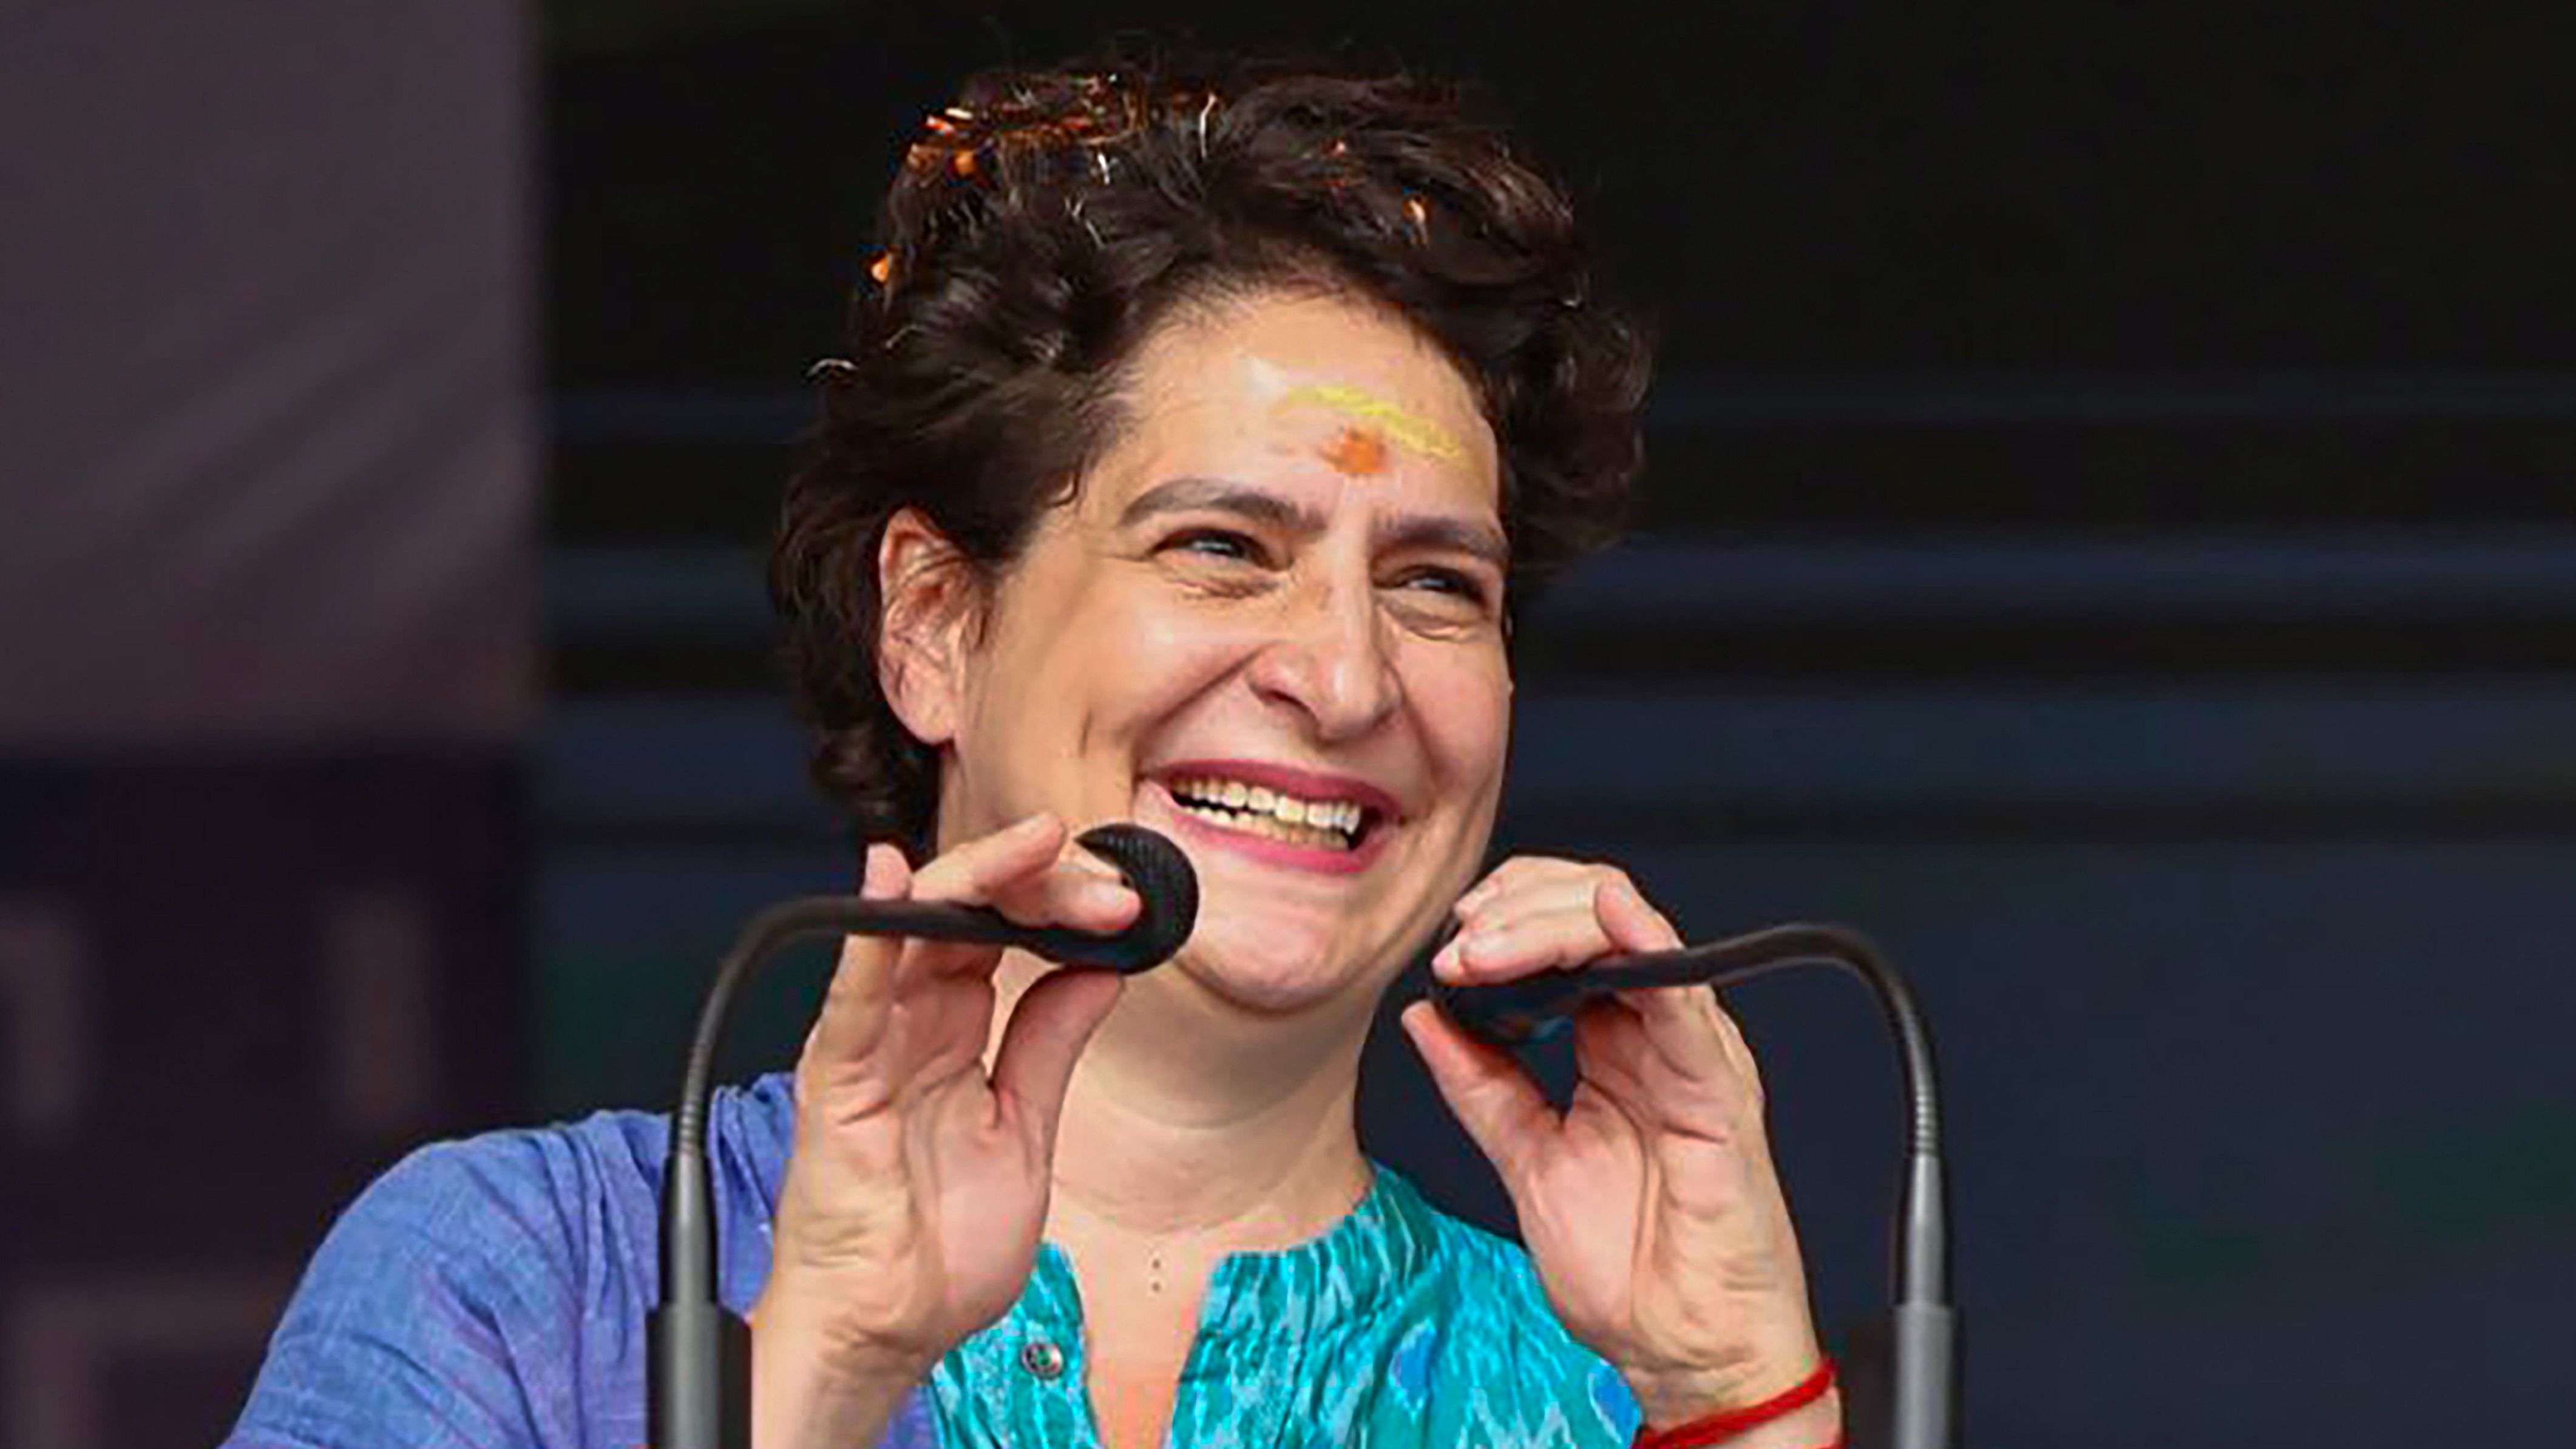 In Rajasthan, the Congress government has given 1.3 lakh jobs but here 63,000 posts are vacant, Priyanka Gandhi said. Credit: PTI Photo